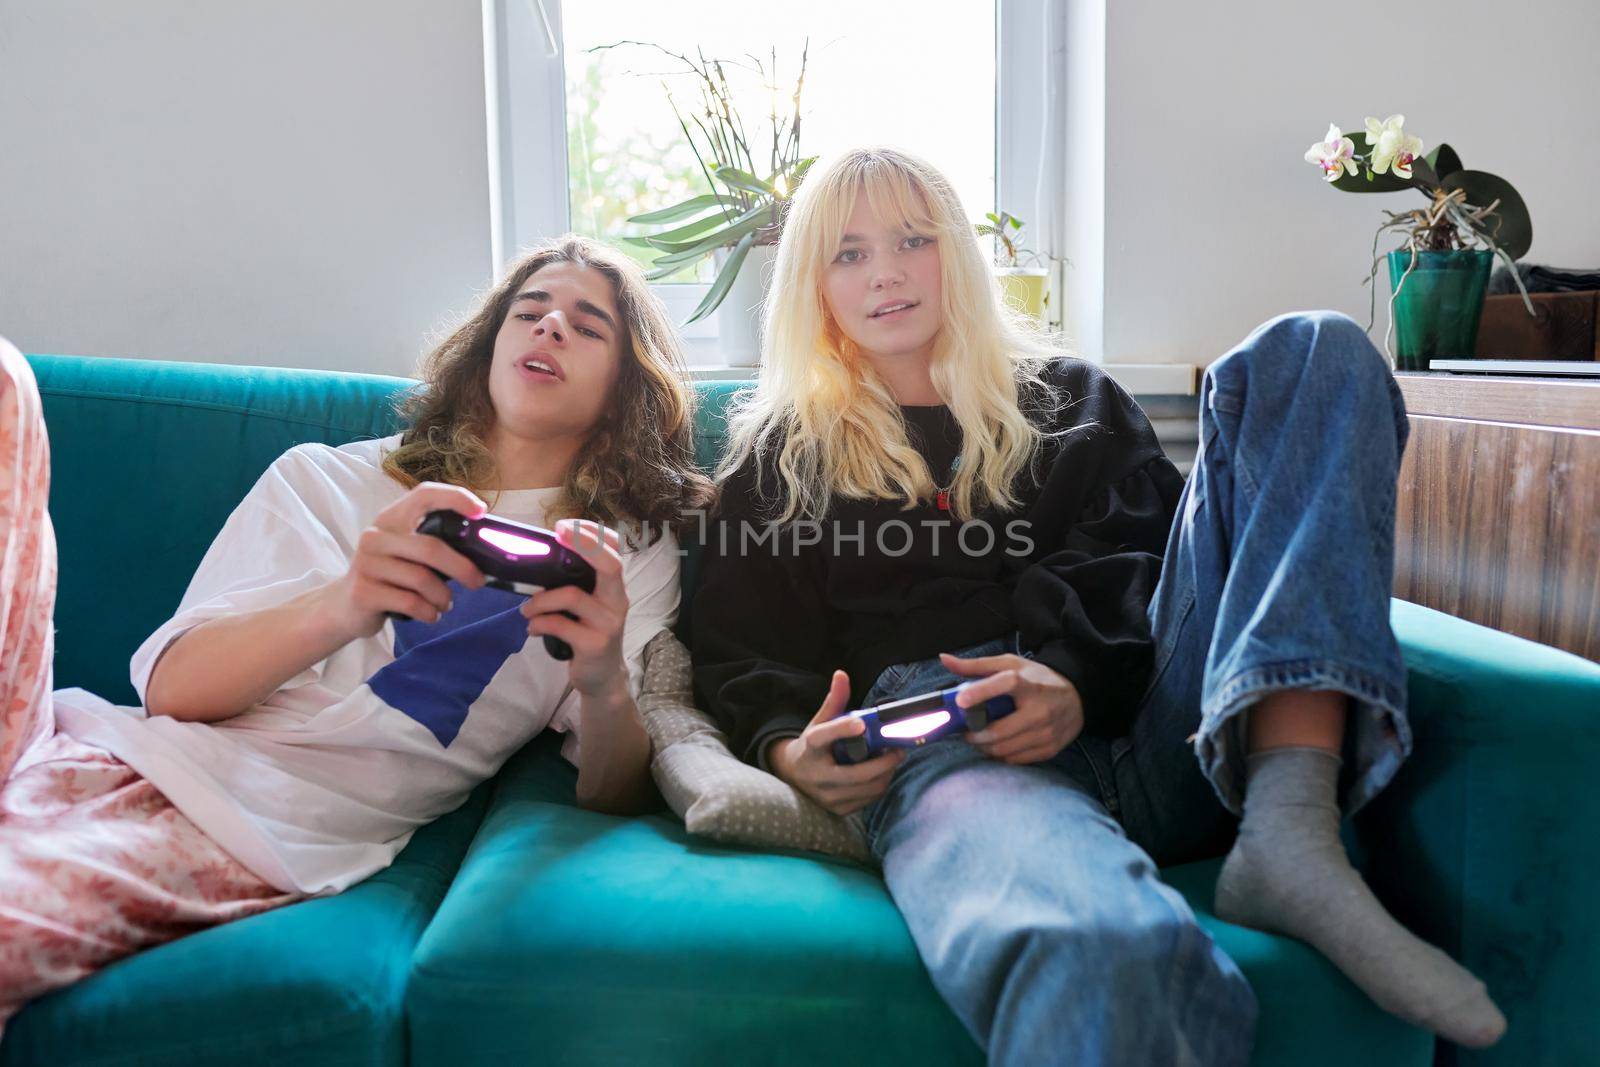 Couple of 15, 16 years old teenage friends playing with video game console, sitting at home on couch, having fun together. Real people, teenagers lifestyle, virtual computer games concept